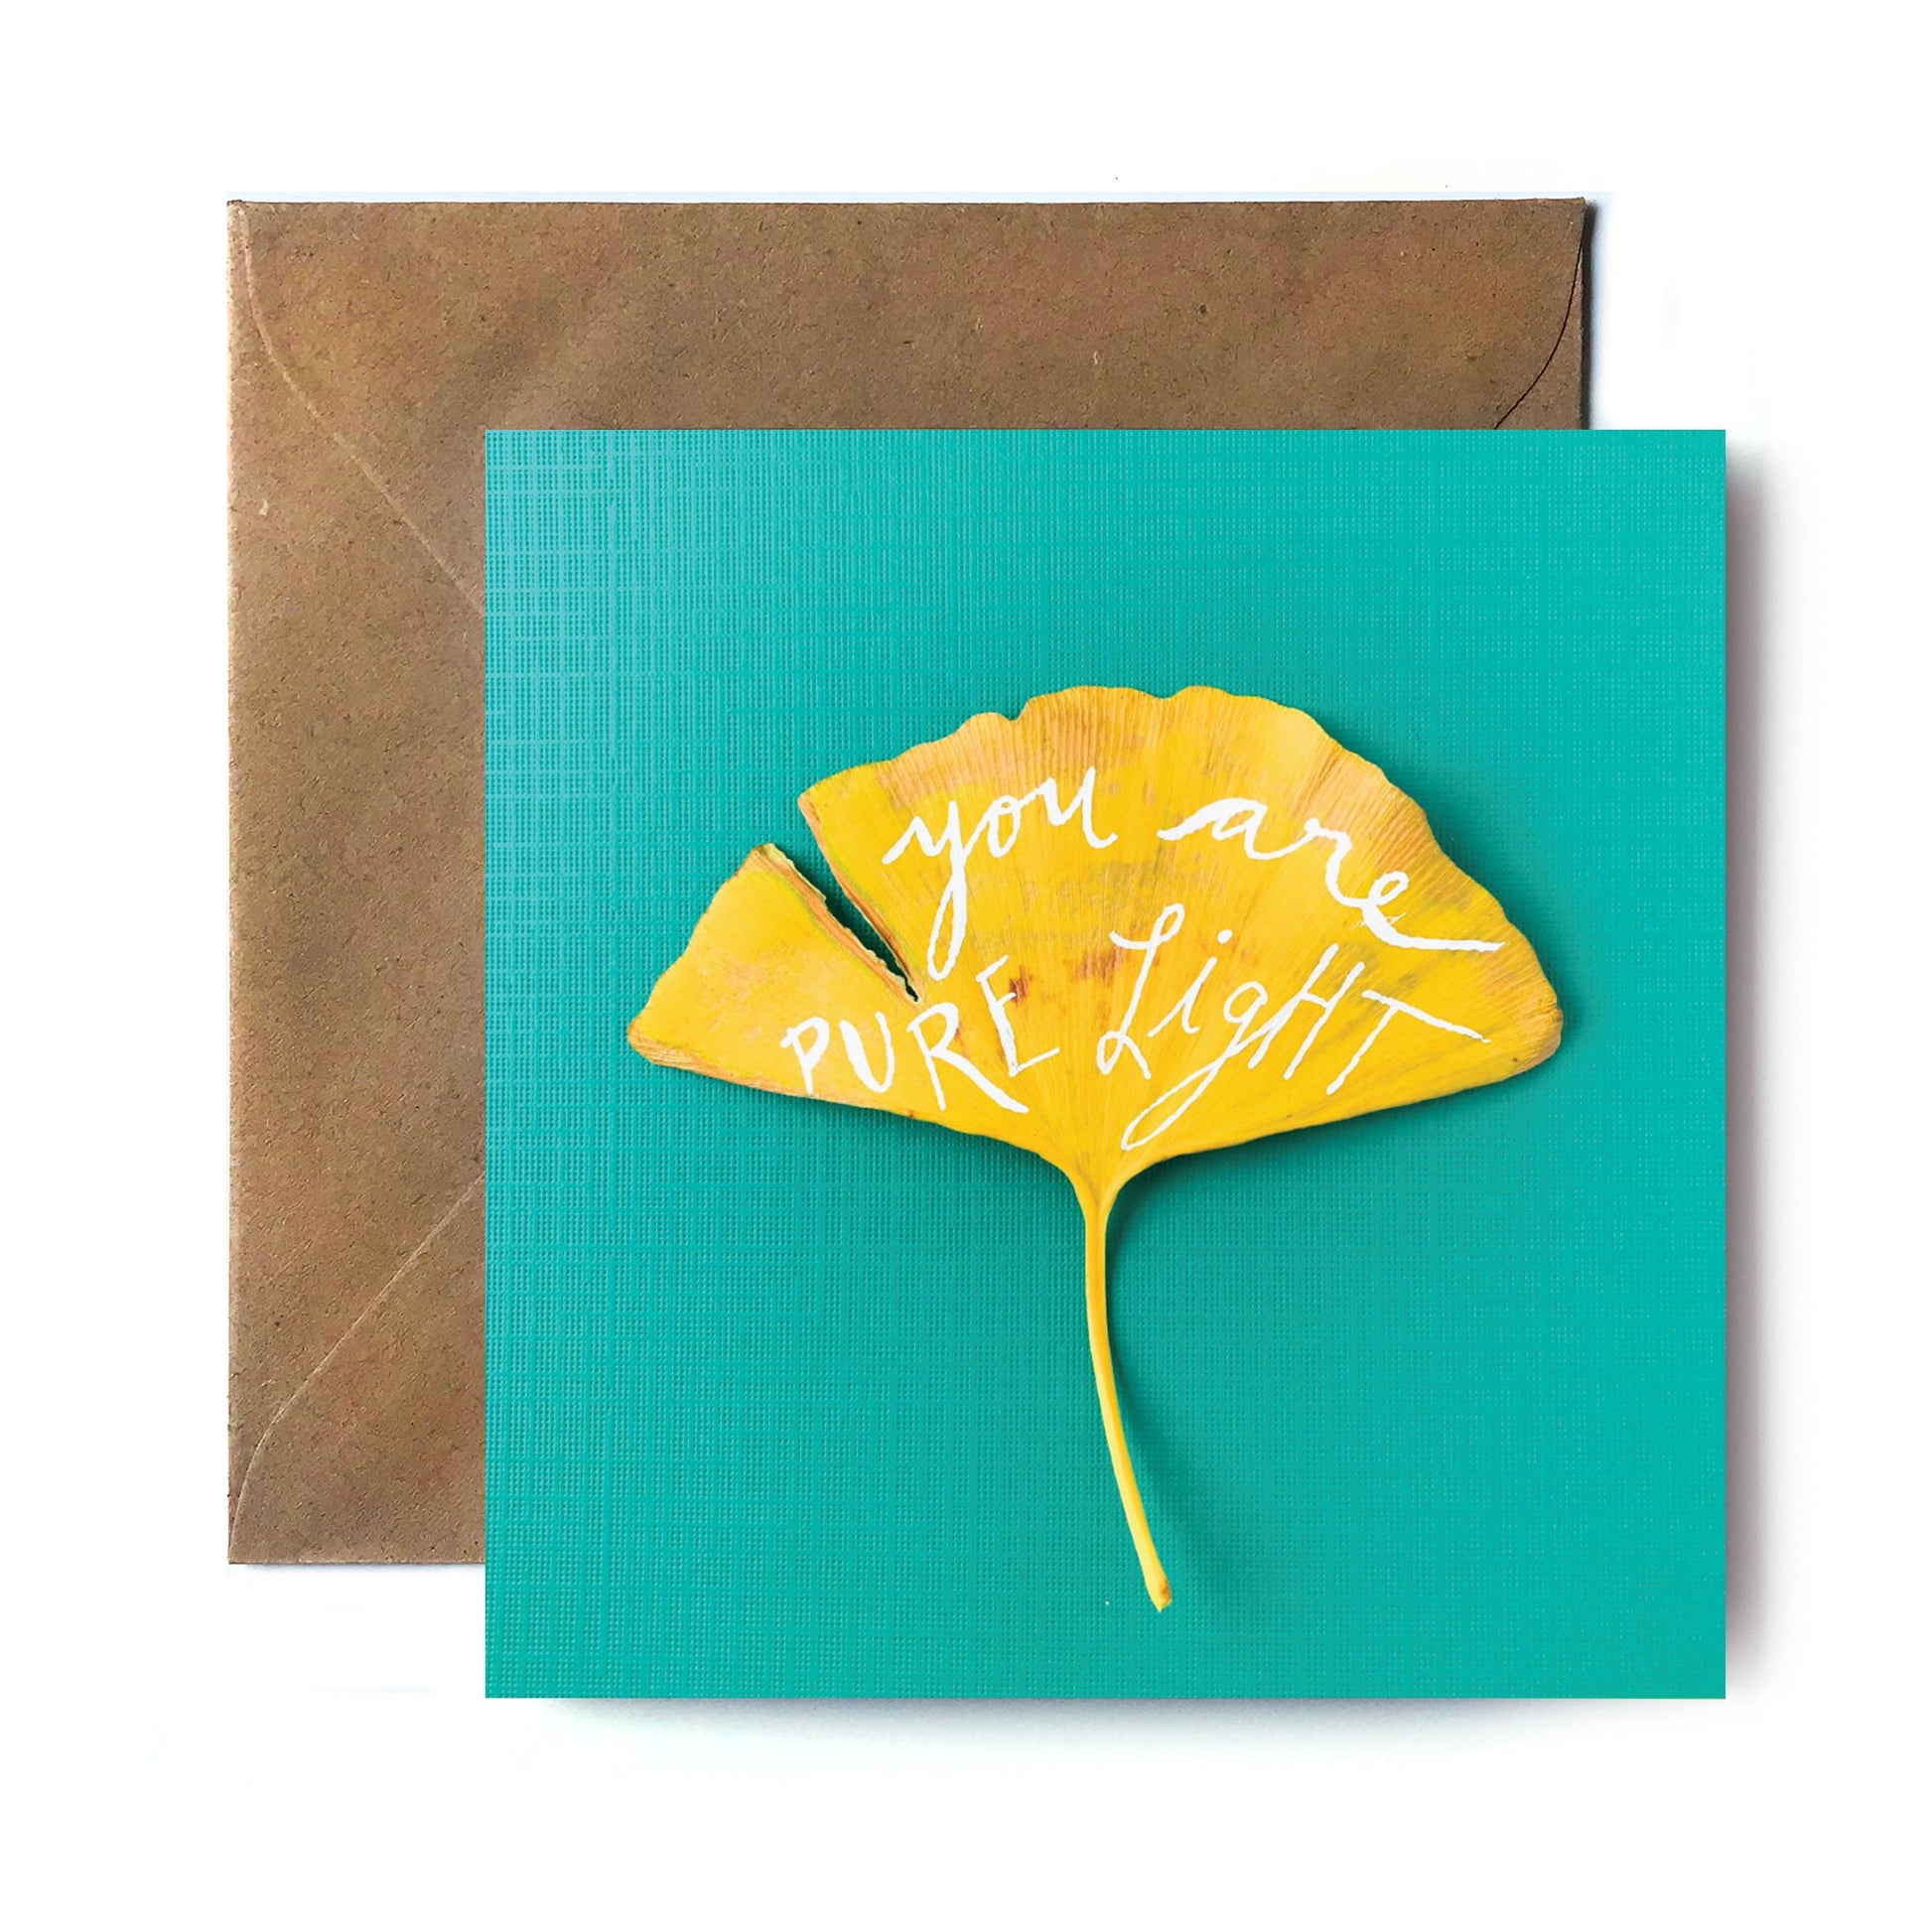 You are Pure Light (Single Card) square card Tiny and Snail